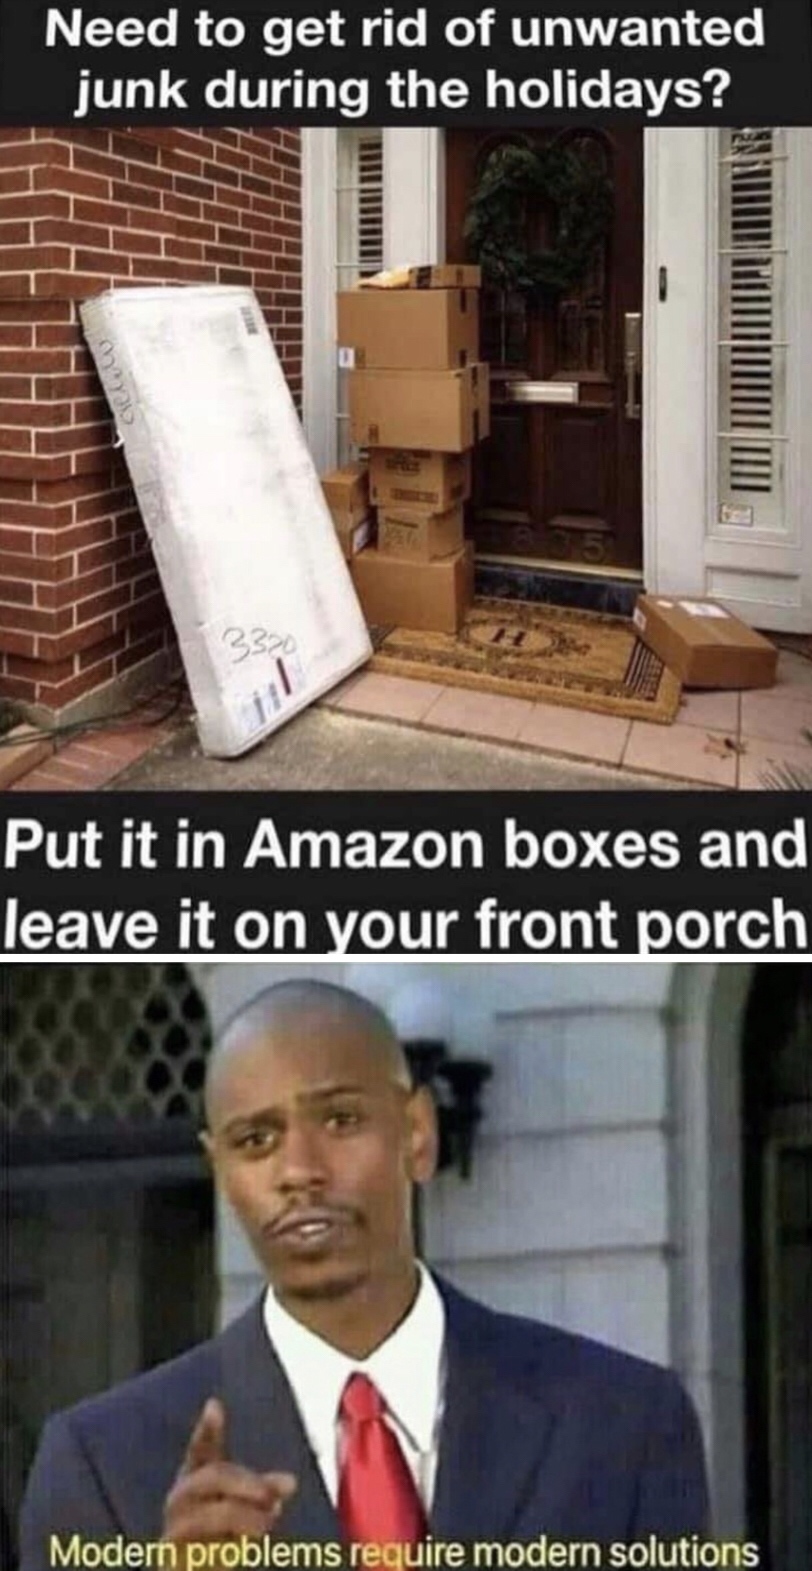 modern problems require modern solutions - Need to get rid of unwanted junk during the holidays? Iii Put it in Amazon boxes and leave it on your front porch Modern problems require modern solutions